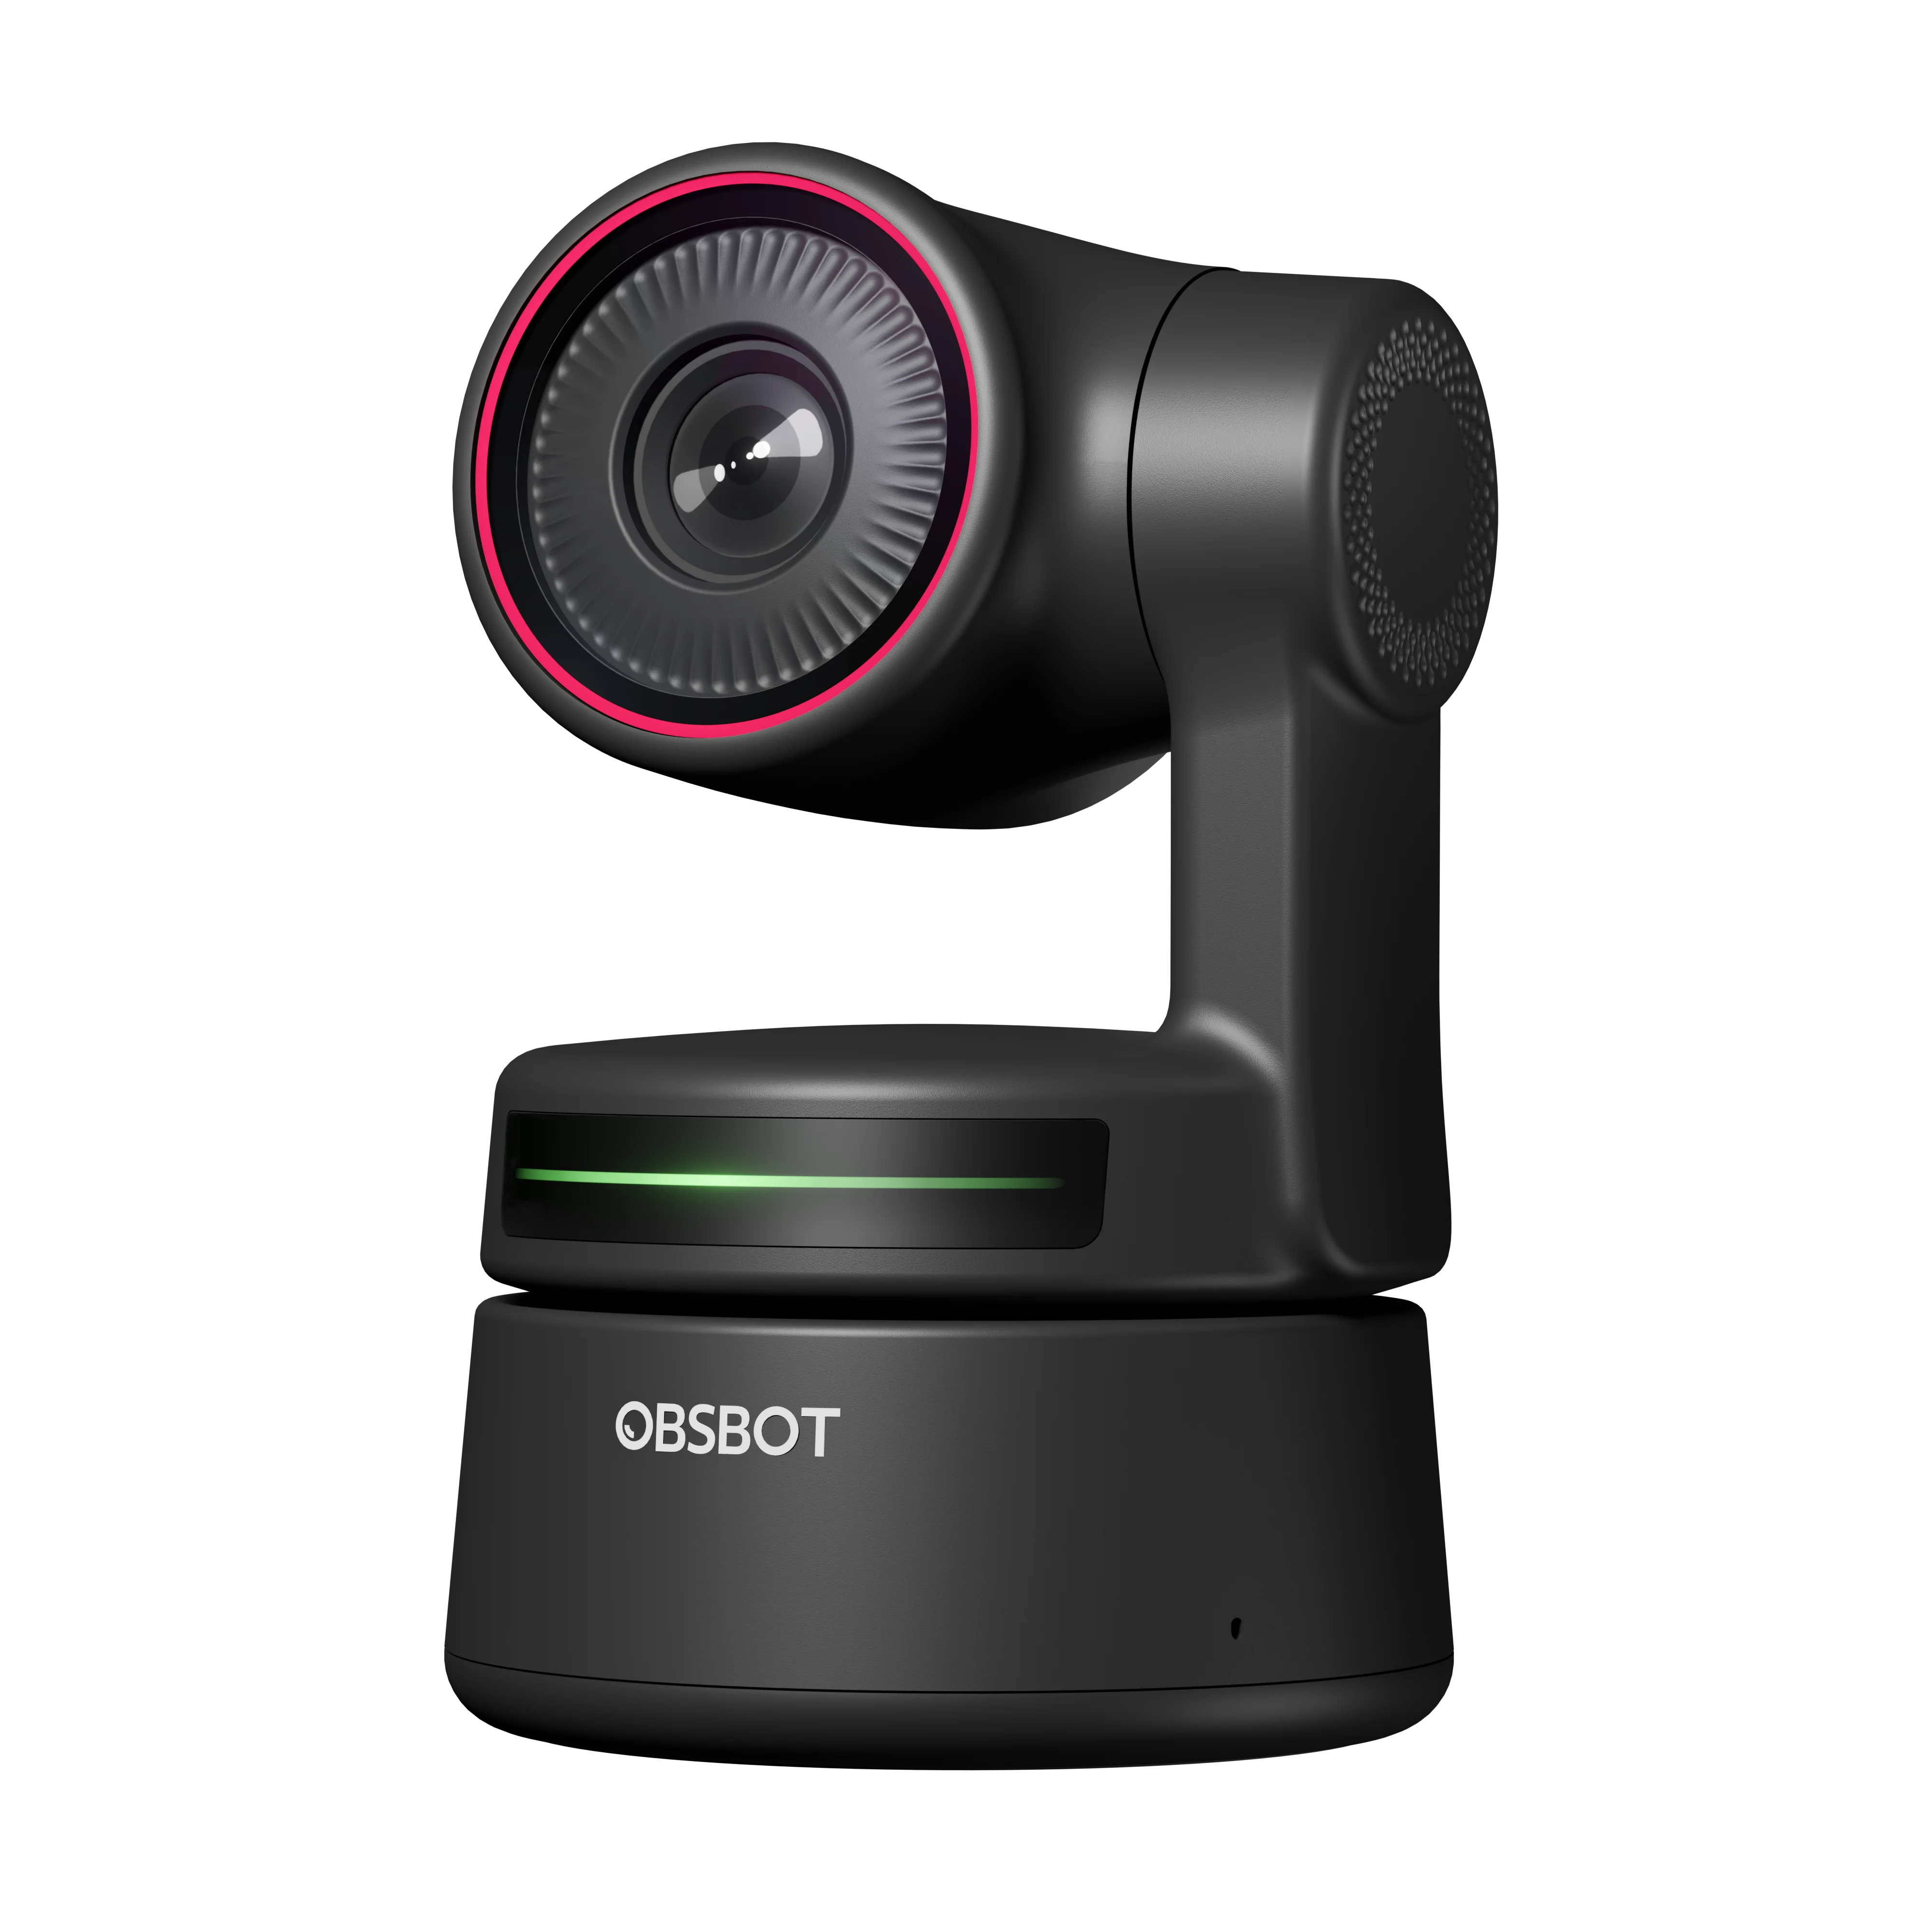 

Hot Selling 4k 30FPS Web Camera AI-powered PTZ Gesture Control Obsbot Tiny 4k Webcam For Live Stream Video Meeting Remote Class